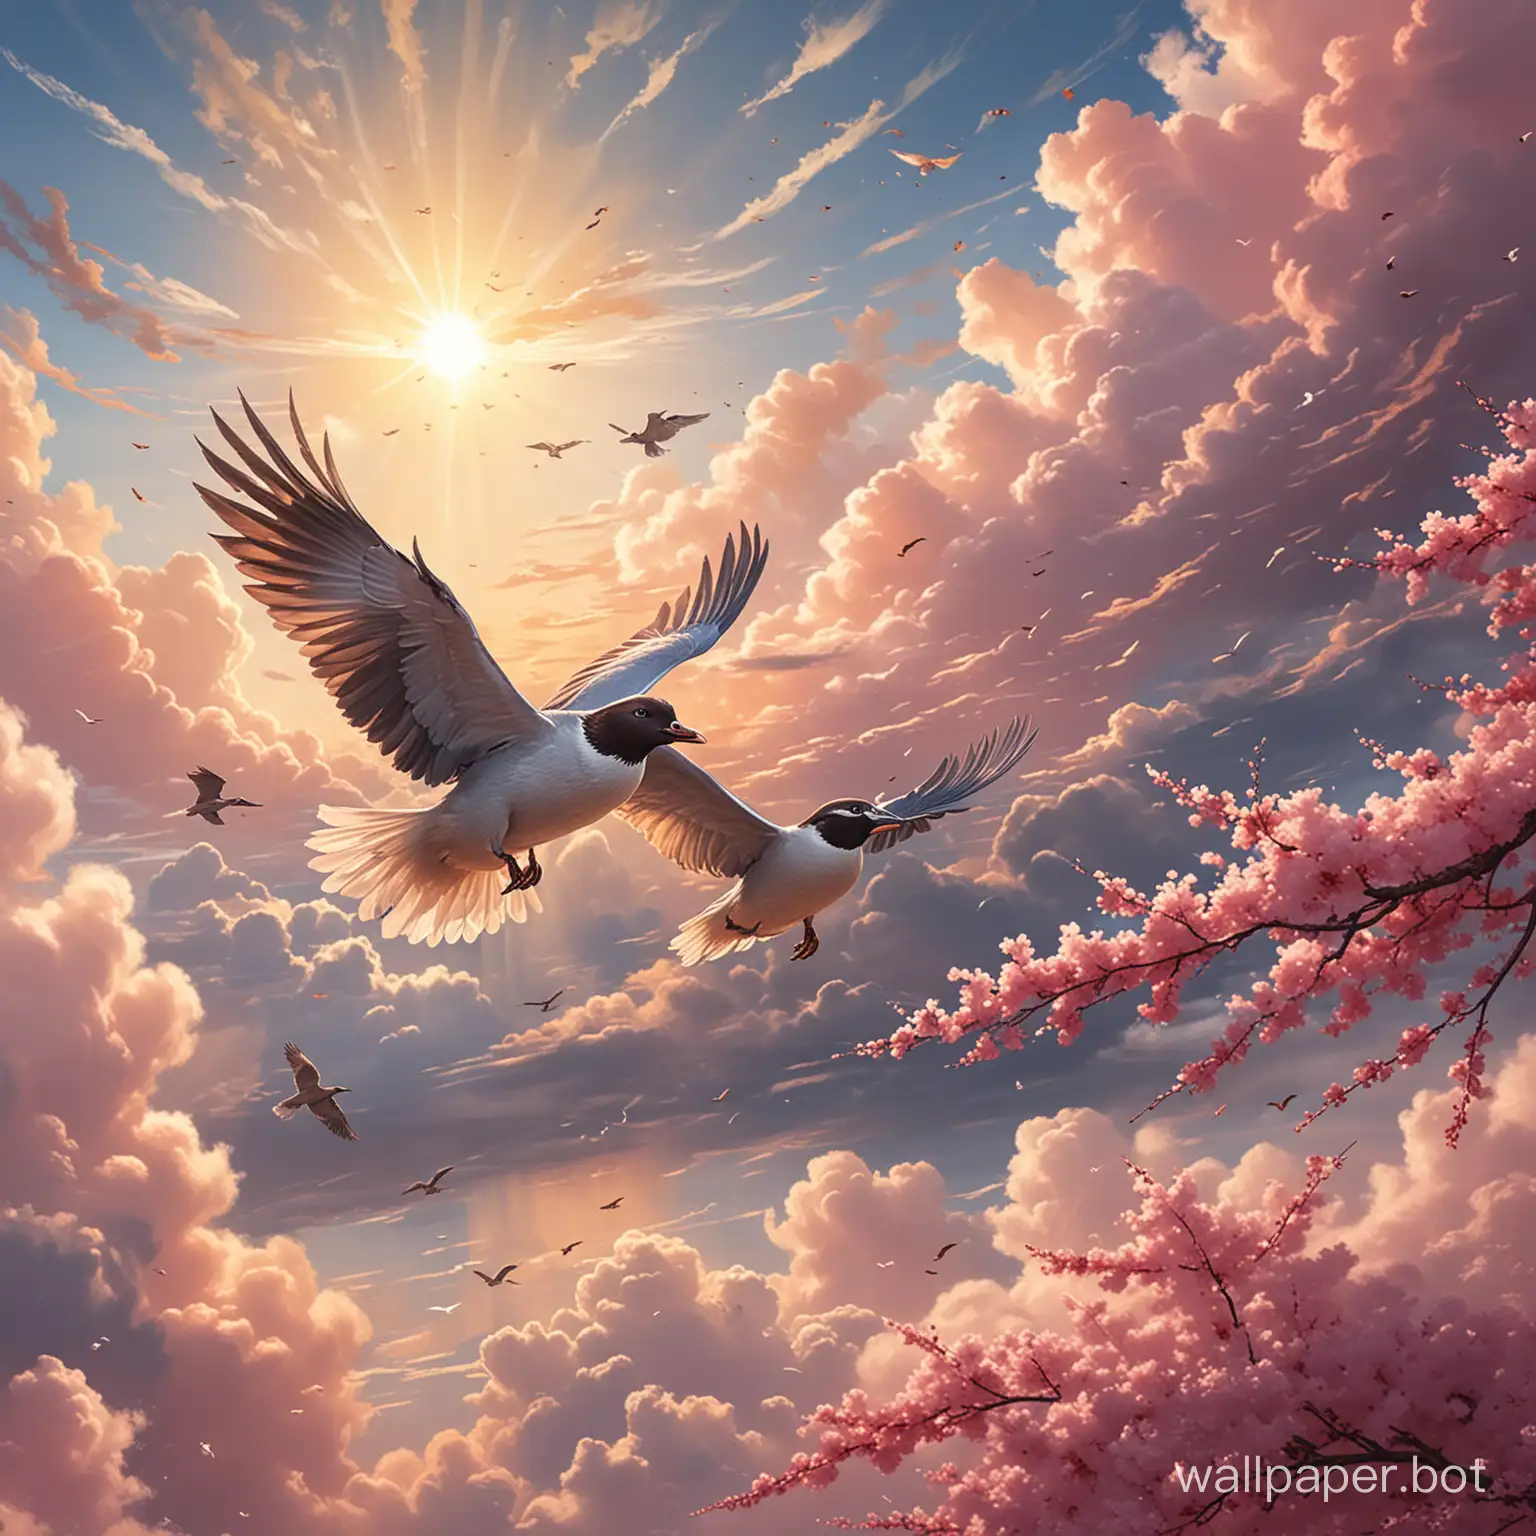 Graceful-Bird-and-Duck-Soaring-Amidst-Sunlit-Clouds-with-Cherry-Blossom-Accent